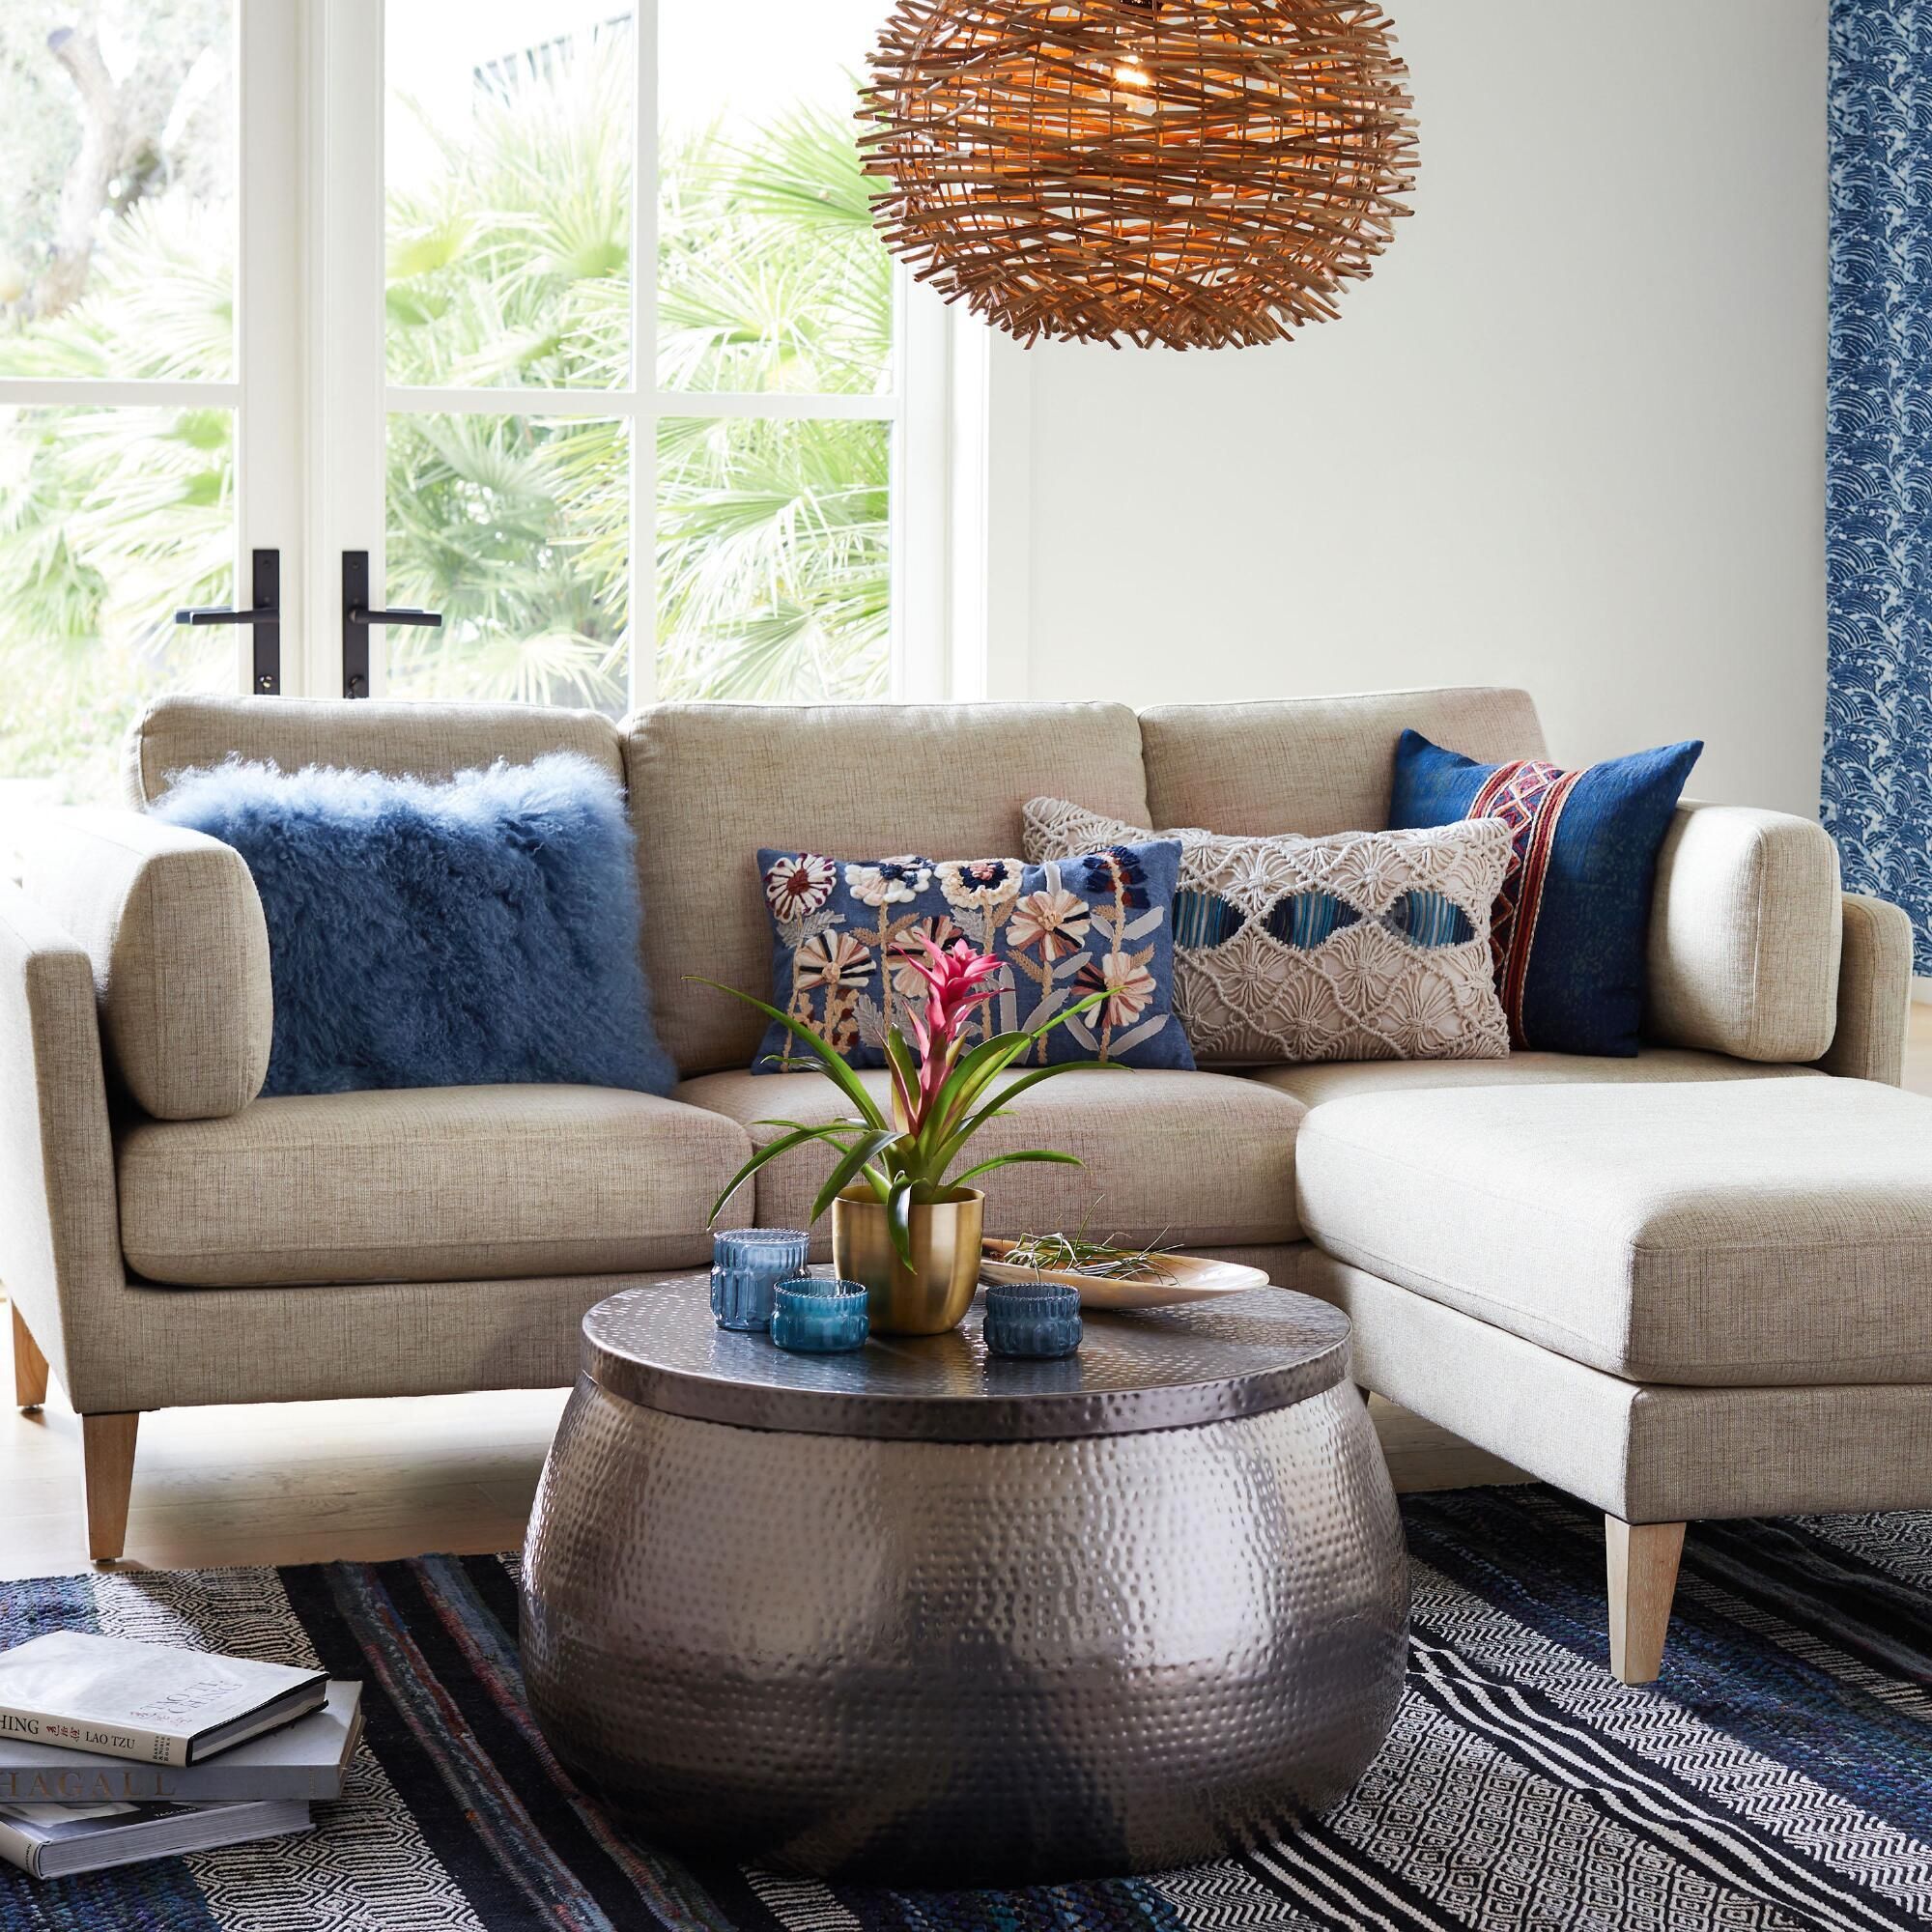 15 Best Modern Round Coffee Tables For Every Budget 2022 | Apartment Therapy In Circular Coffee Tables (Gallery 20 of 20)